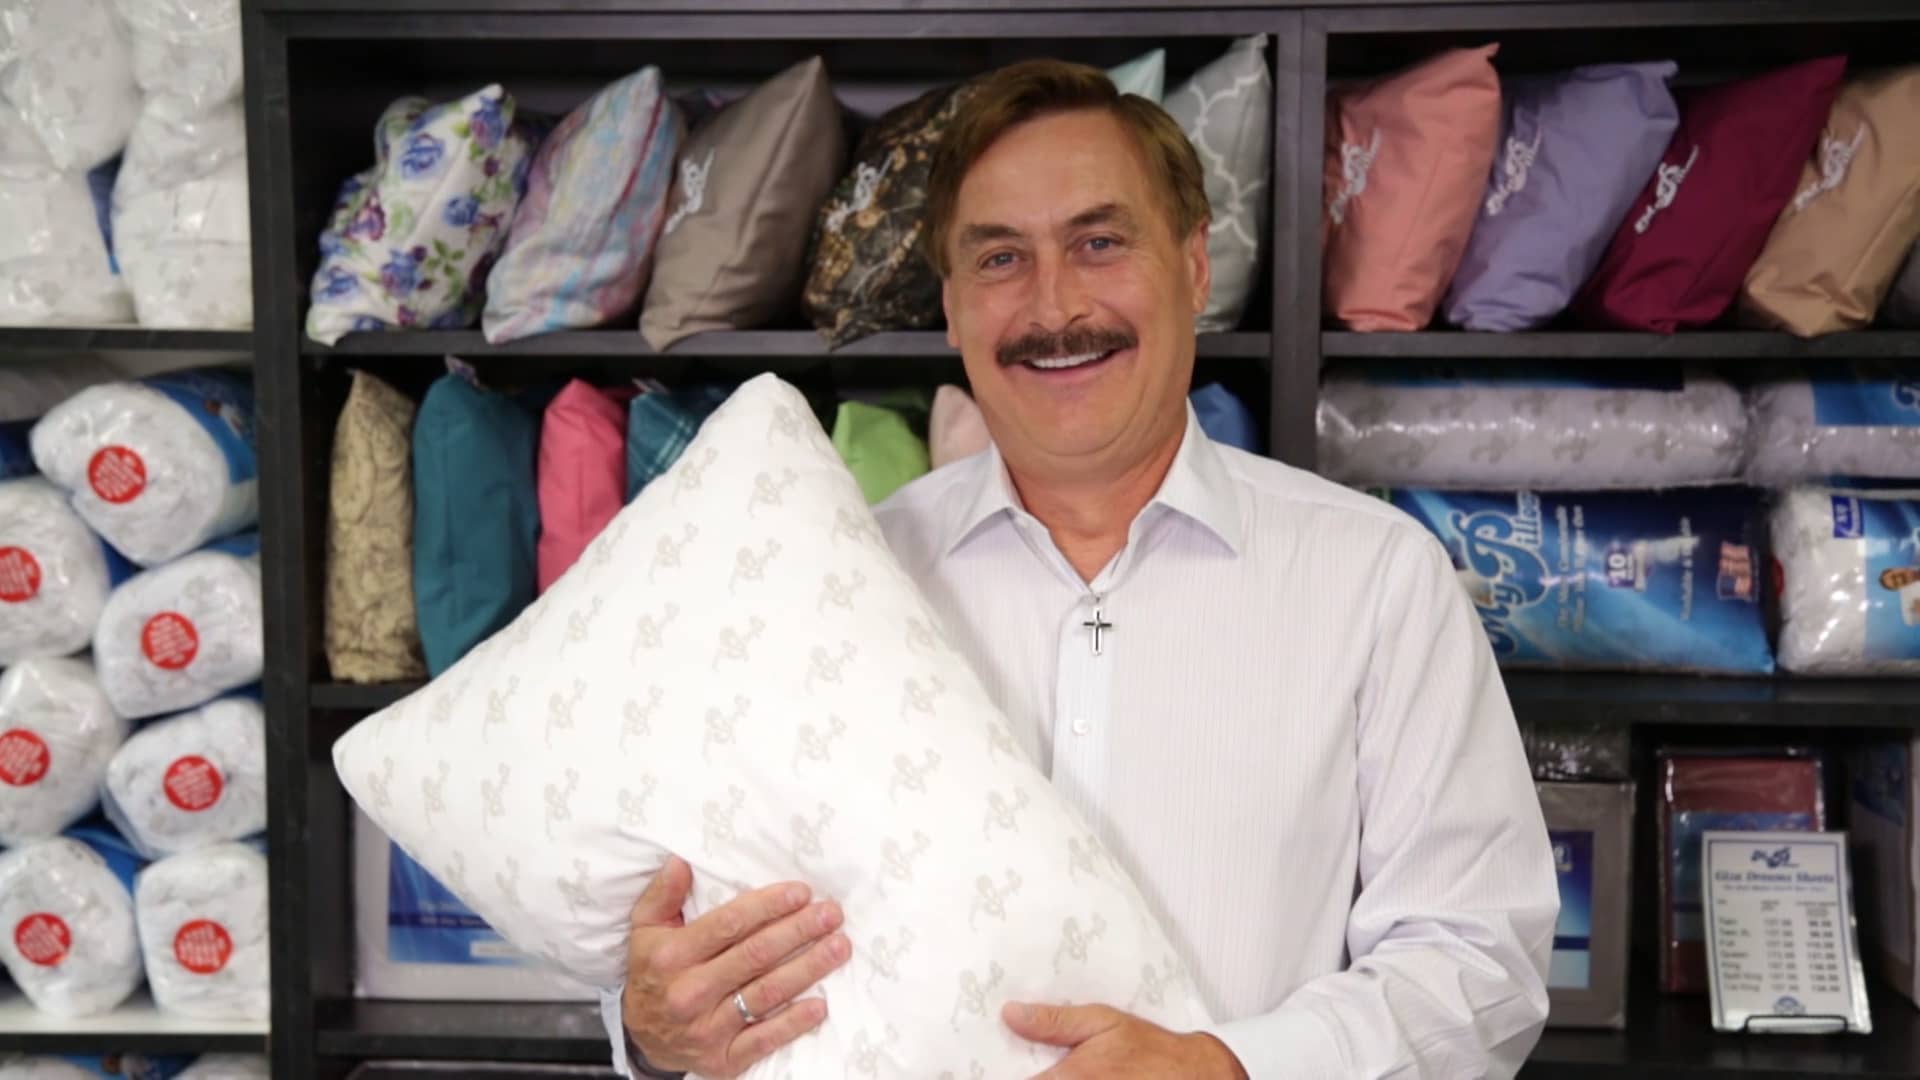 MyPillow founder went from crack addict 